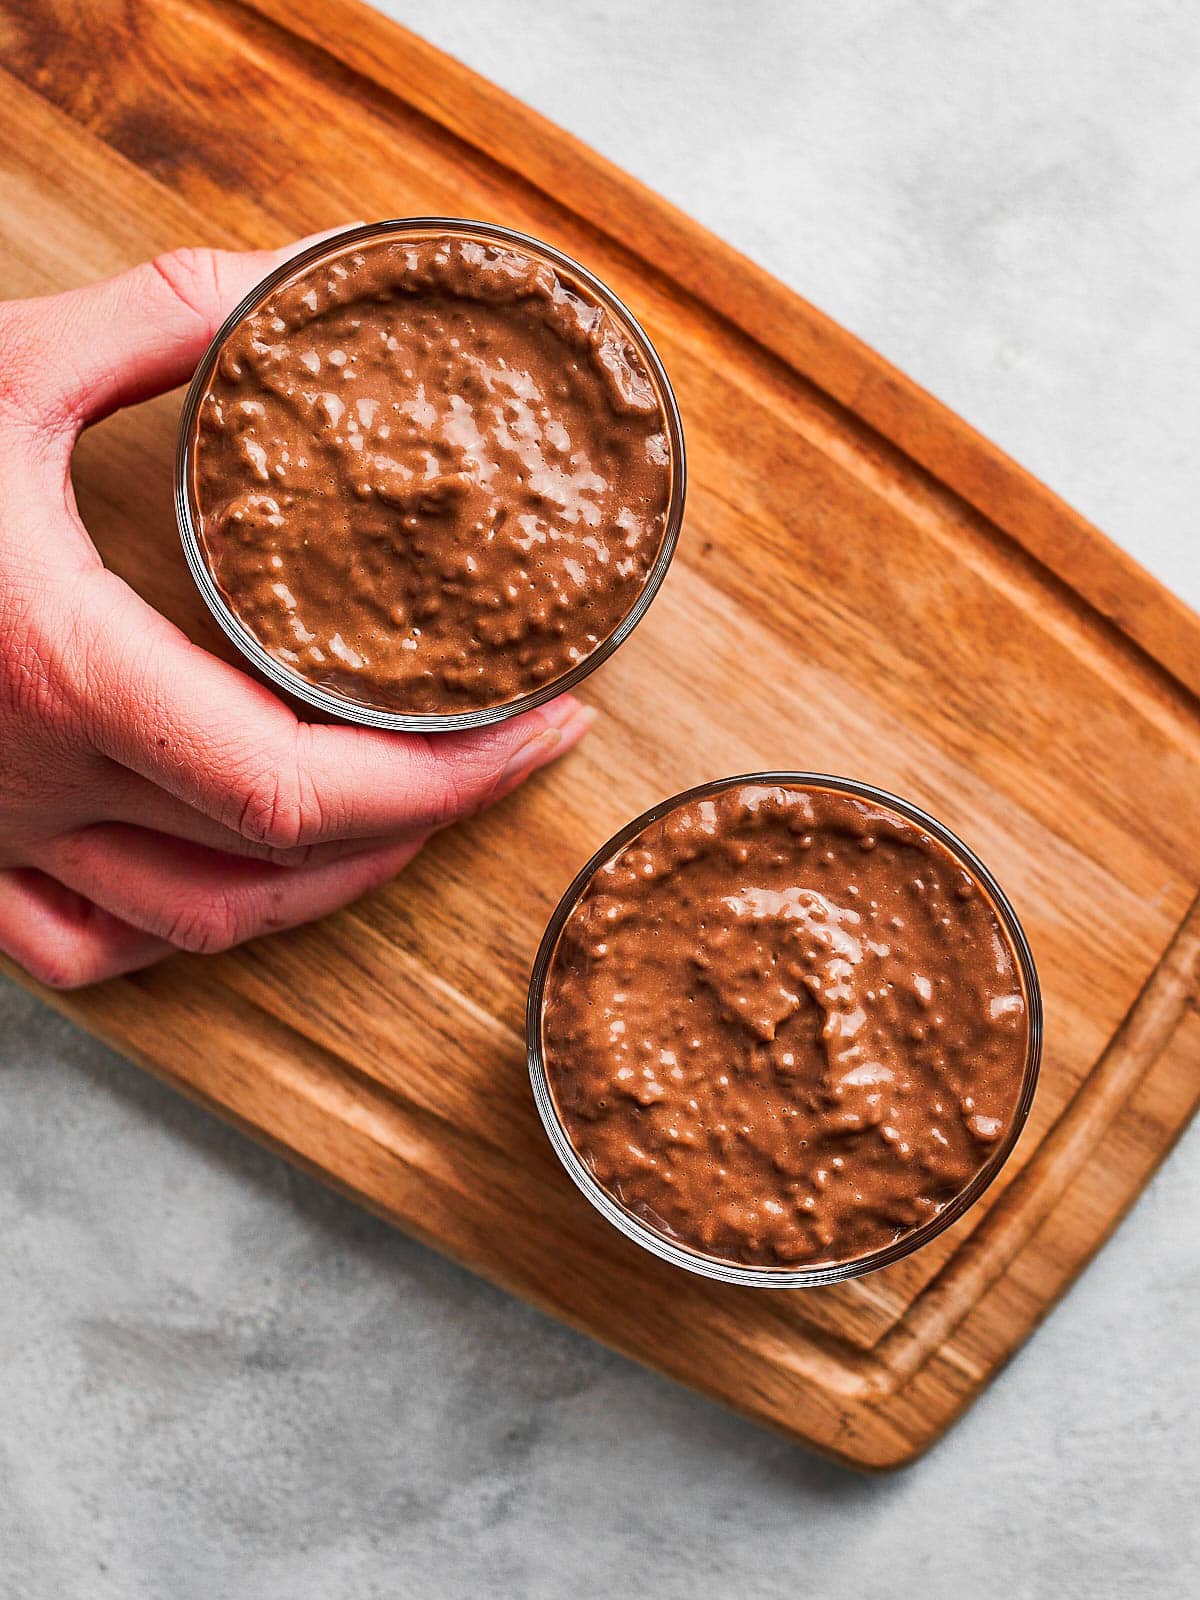 Shaking the avocado chia pudding jars to level the top